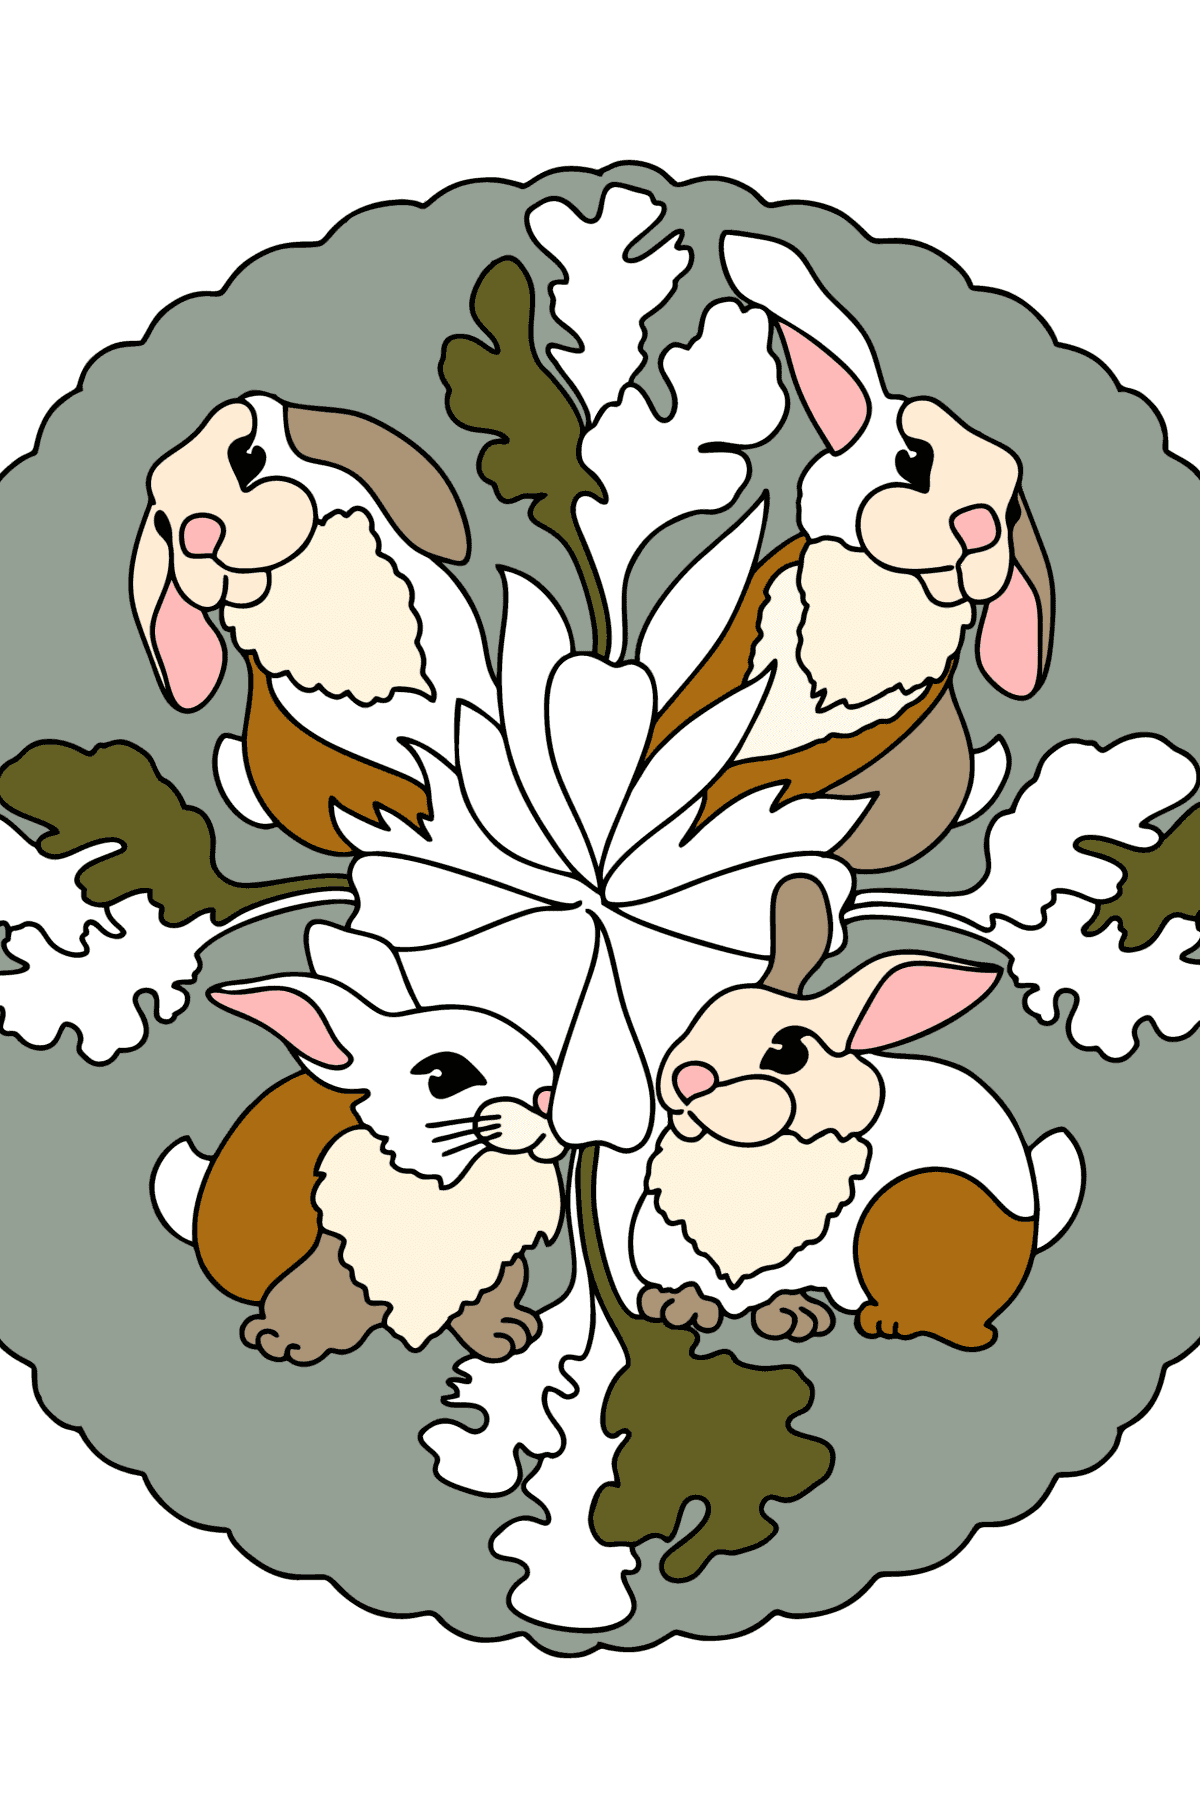 Mandala Bunny coloring page - Coloring Pages for Kids